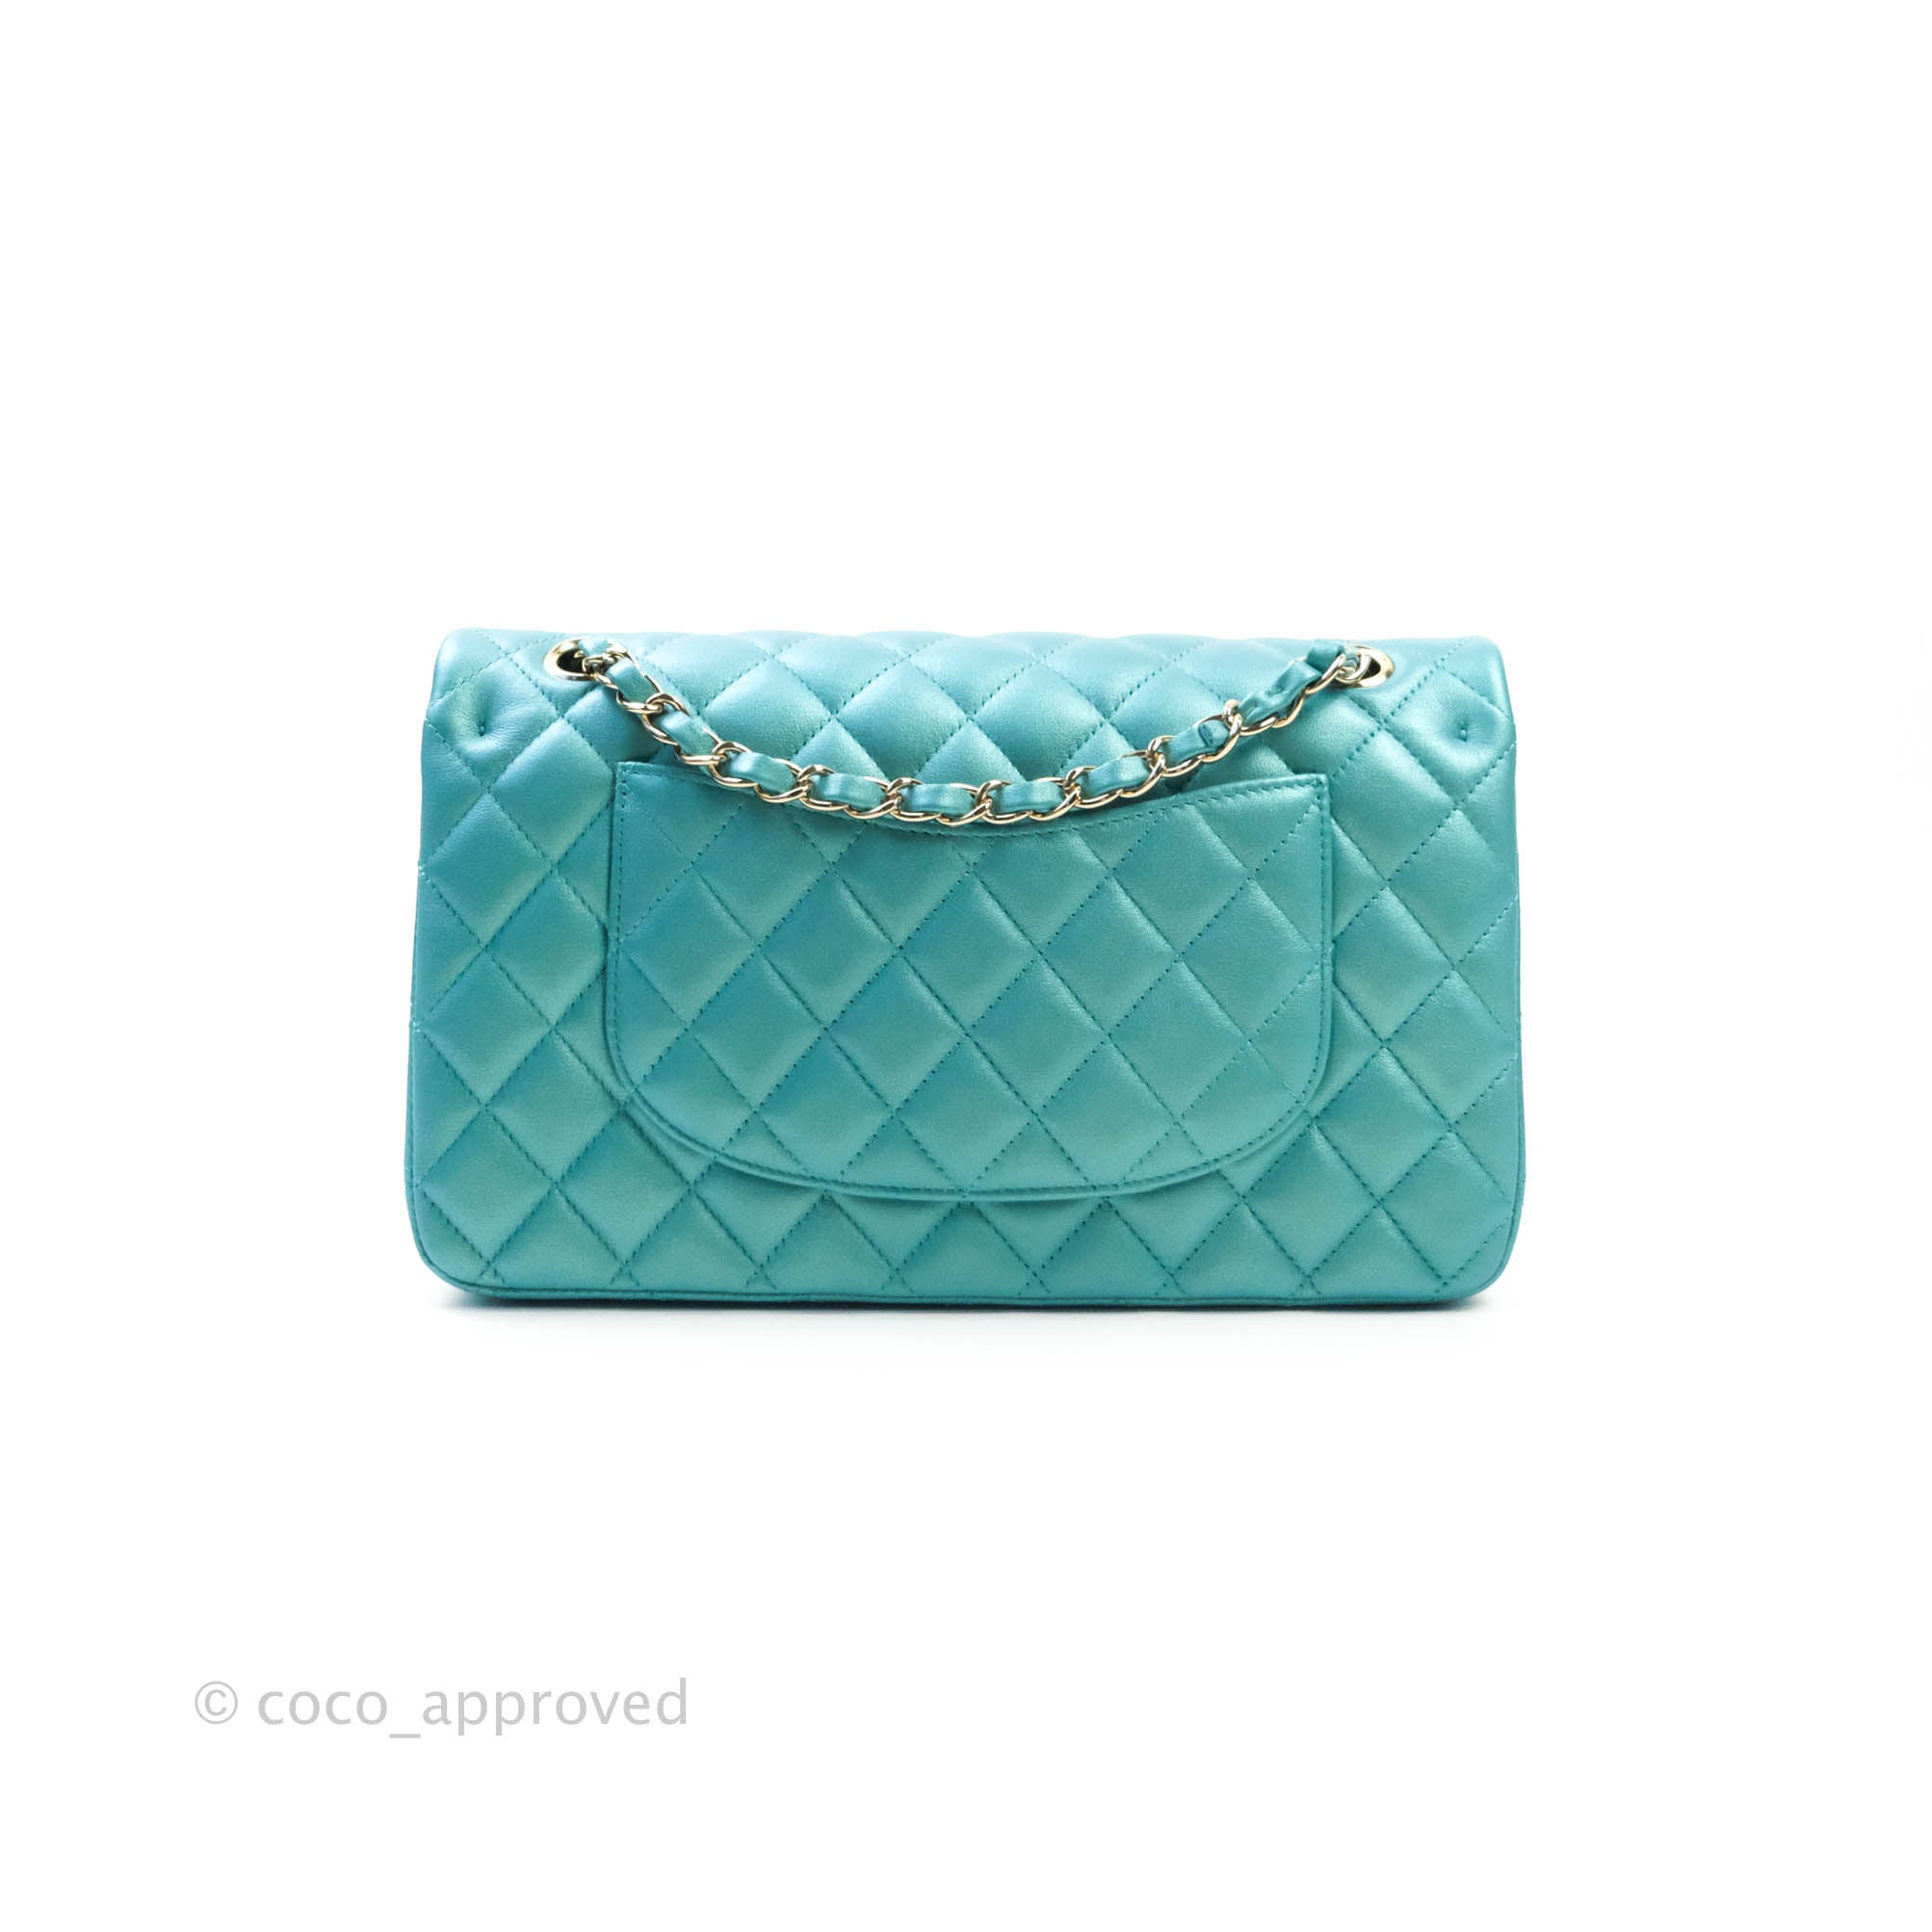 CHANEL Patent Calfskin Quilted Medium Double Flap Turquoise